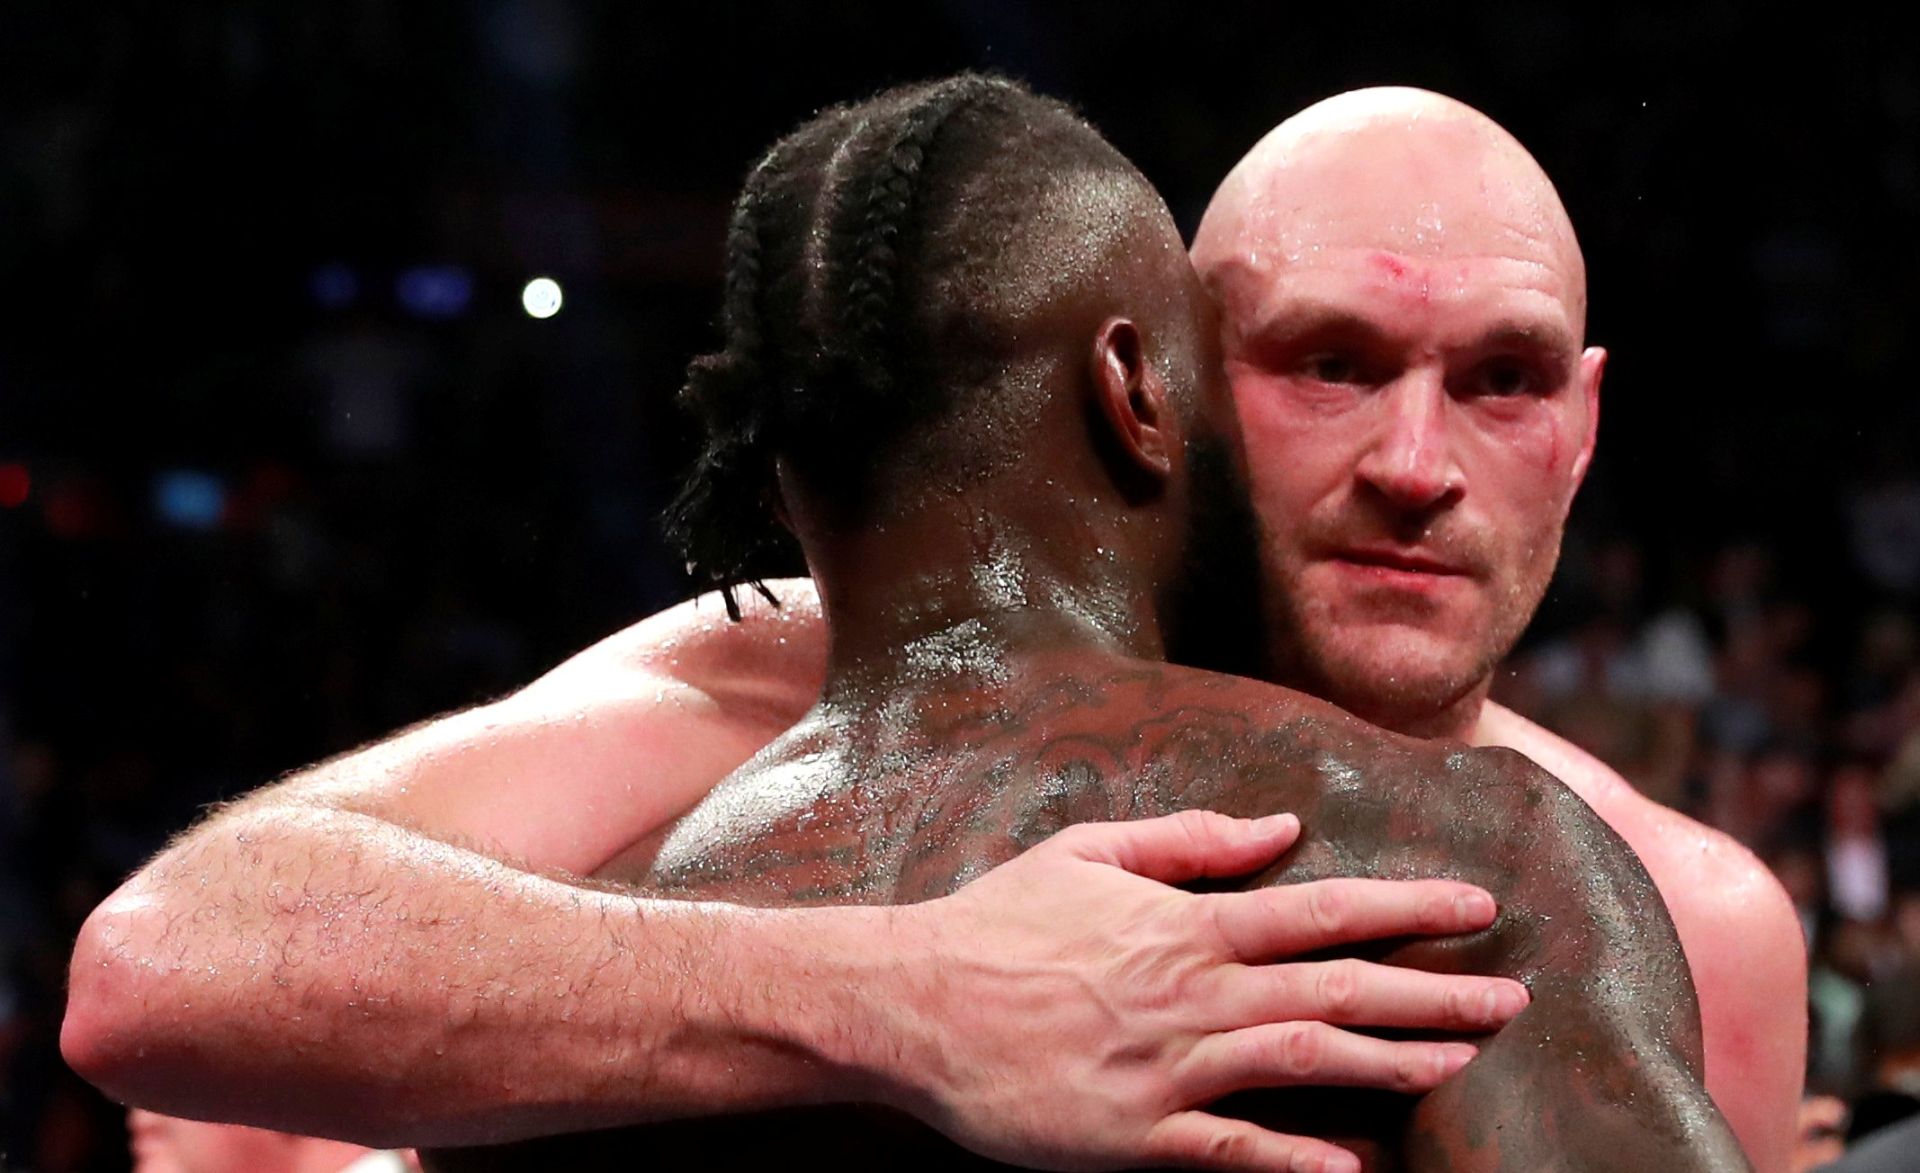 Deontay Wilder v Tyson Fury - WBC World Heavyweight Title Boxing - Deontay Wilder v Tyson Fury - WBC World Heavyweight Title - Staples Centre, Los Angeles, United States - December 1, 2018  Deontay Wilder and Tyson Fury react after the fight  Action Images via Reuters/Andrew Couldridge ANDREW COULDRIDGE